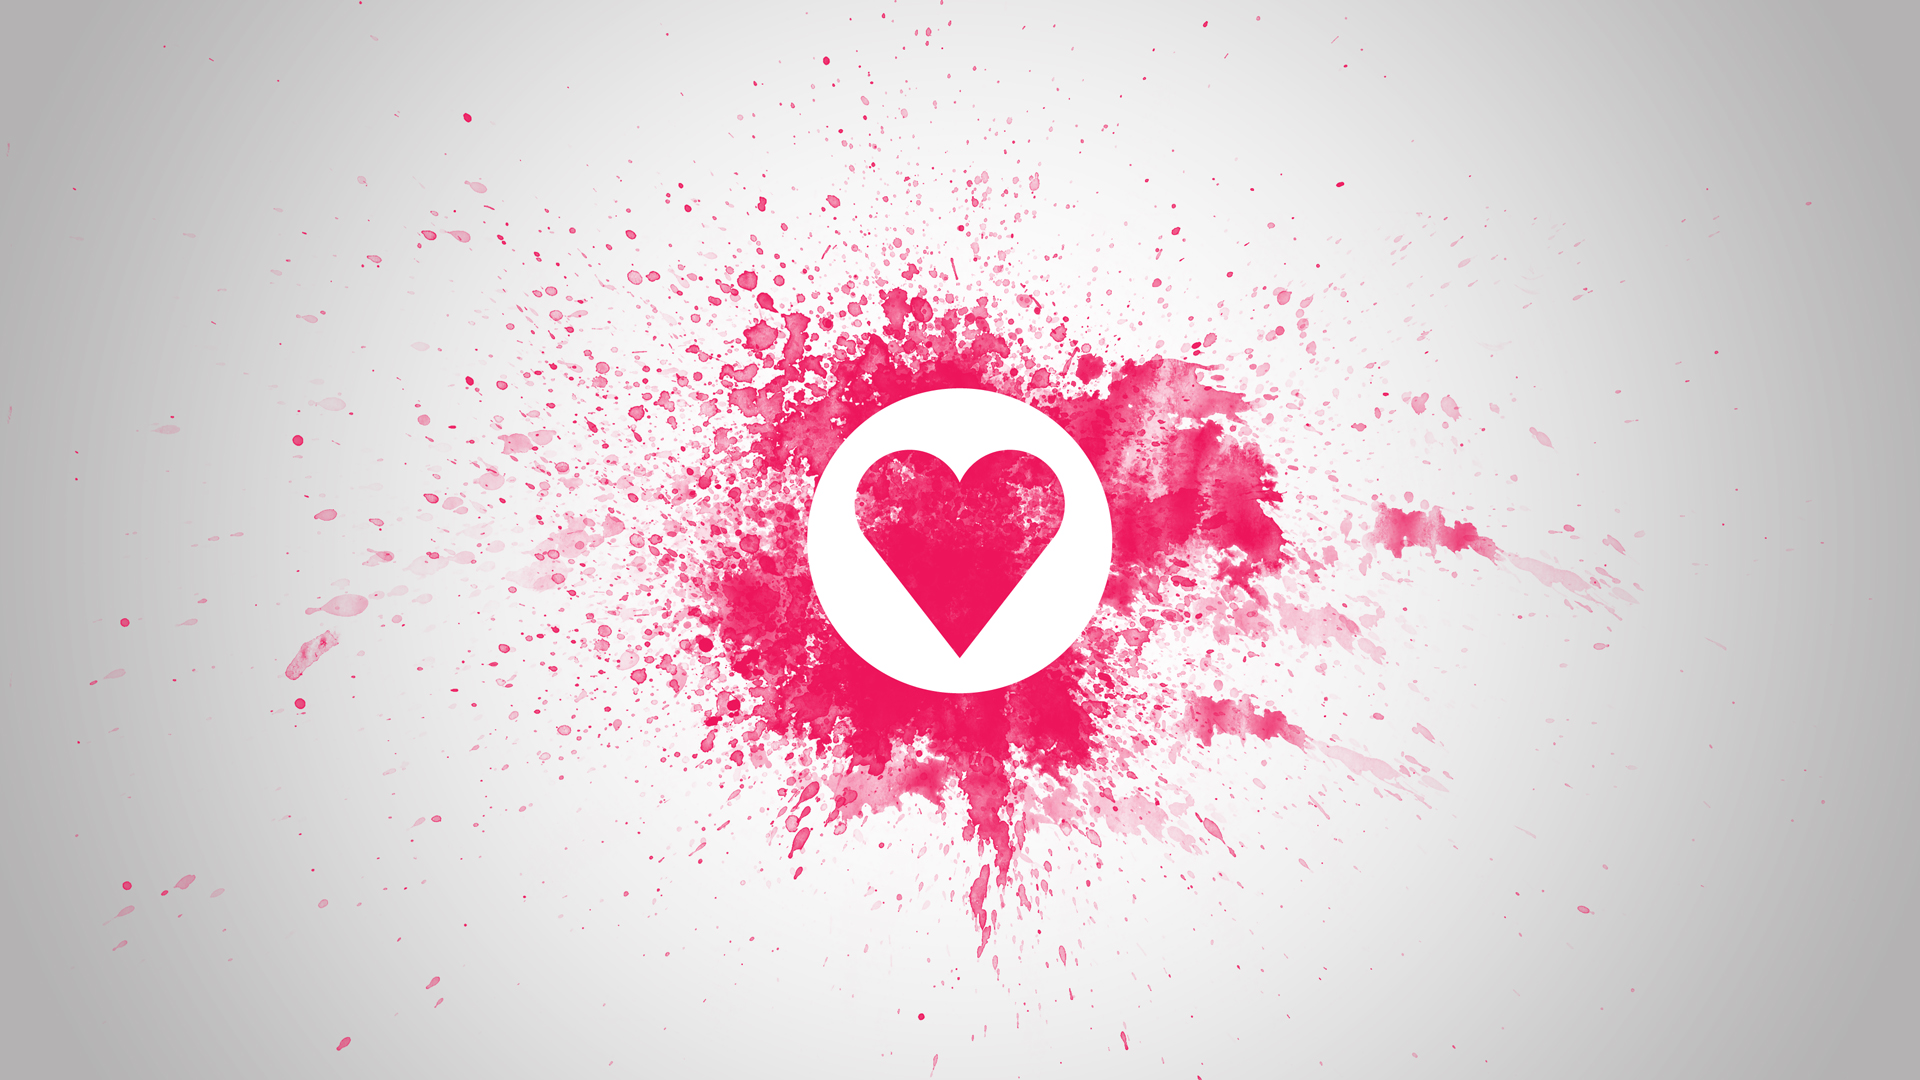 General 1920x1080 heart shapes grunge simple background